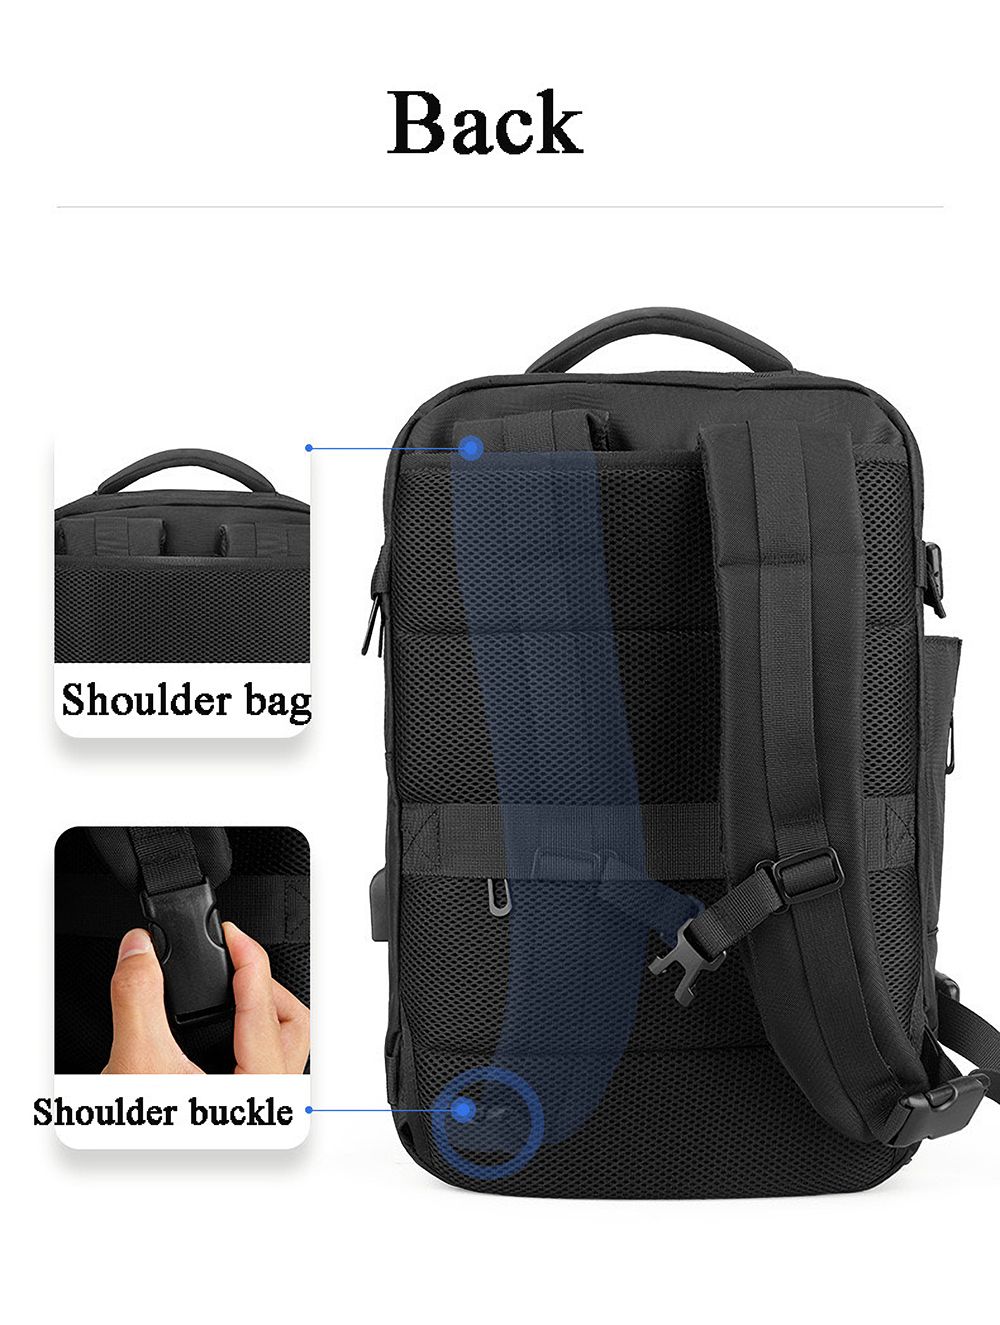 Mark-Ryden-Backpack-Laptop-Bag-Oxford-Cloth-with-USB-Charging-Large-Capacity-Mens-Business-Tavel-Lap-1564602